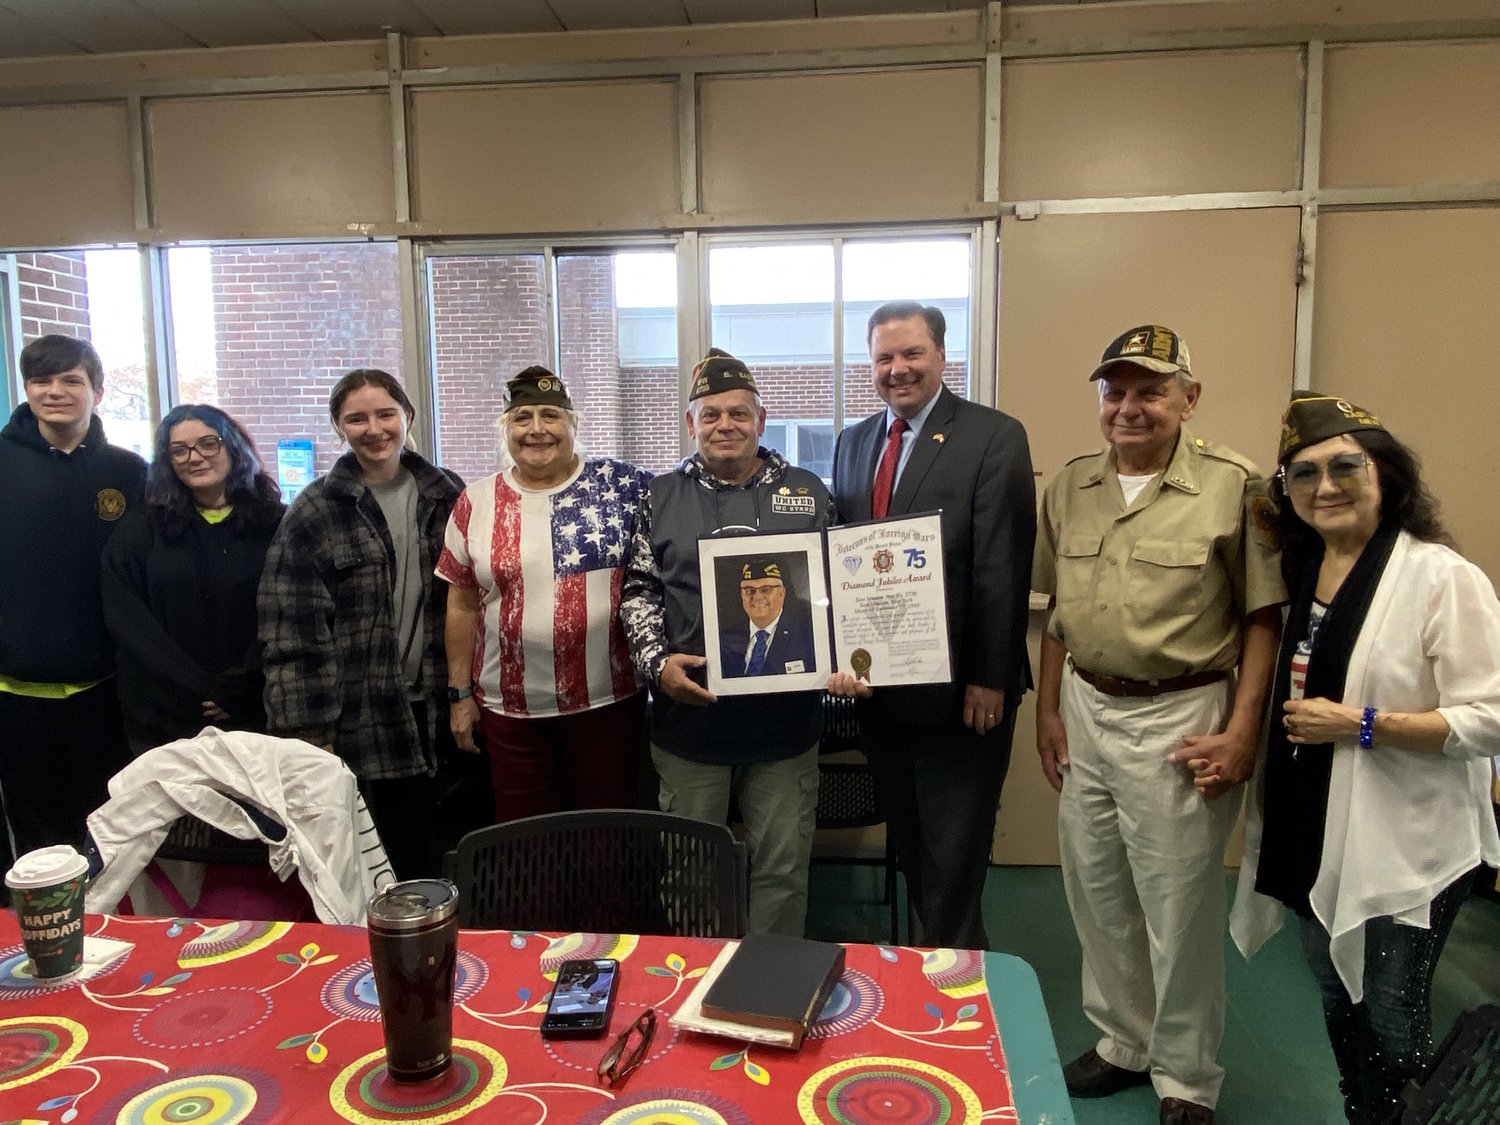 East Meadow Veterans of Foreign War Post 2736 had their annual Veterans Day breakfast together at Veterans Memorial Park.